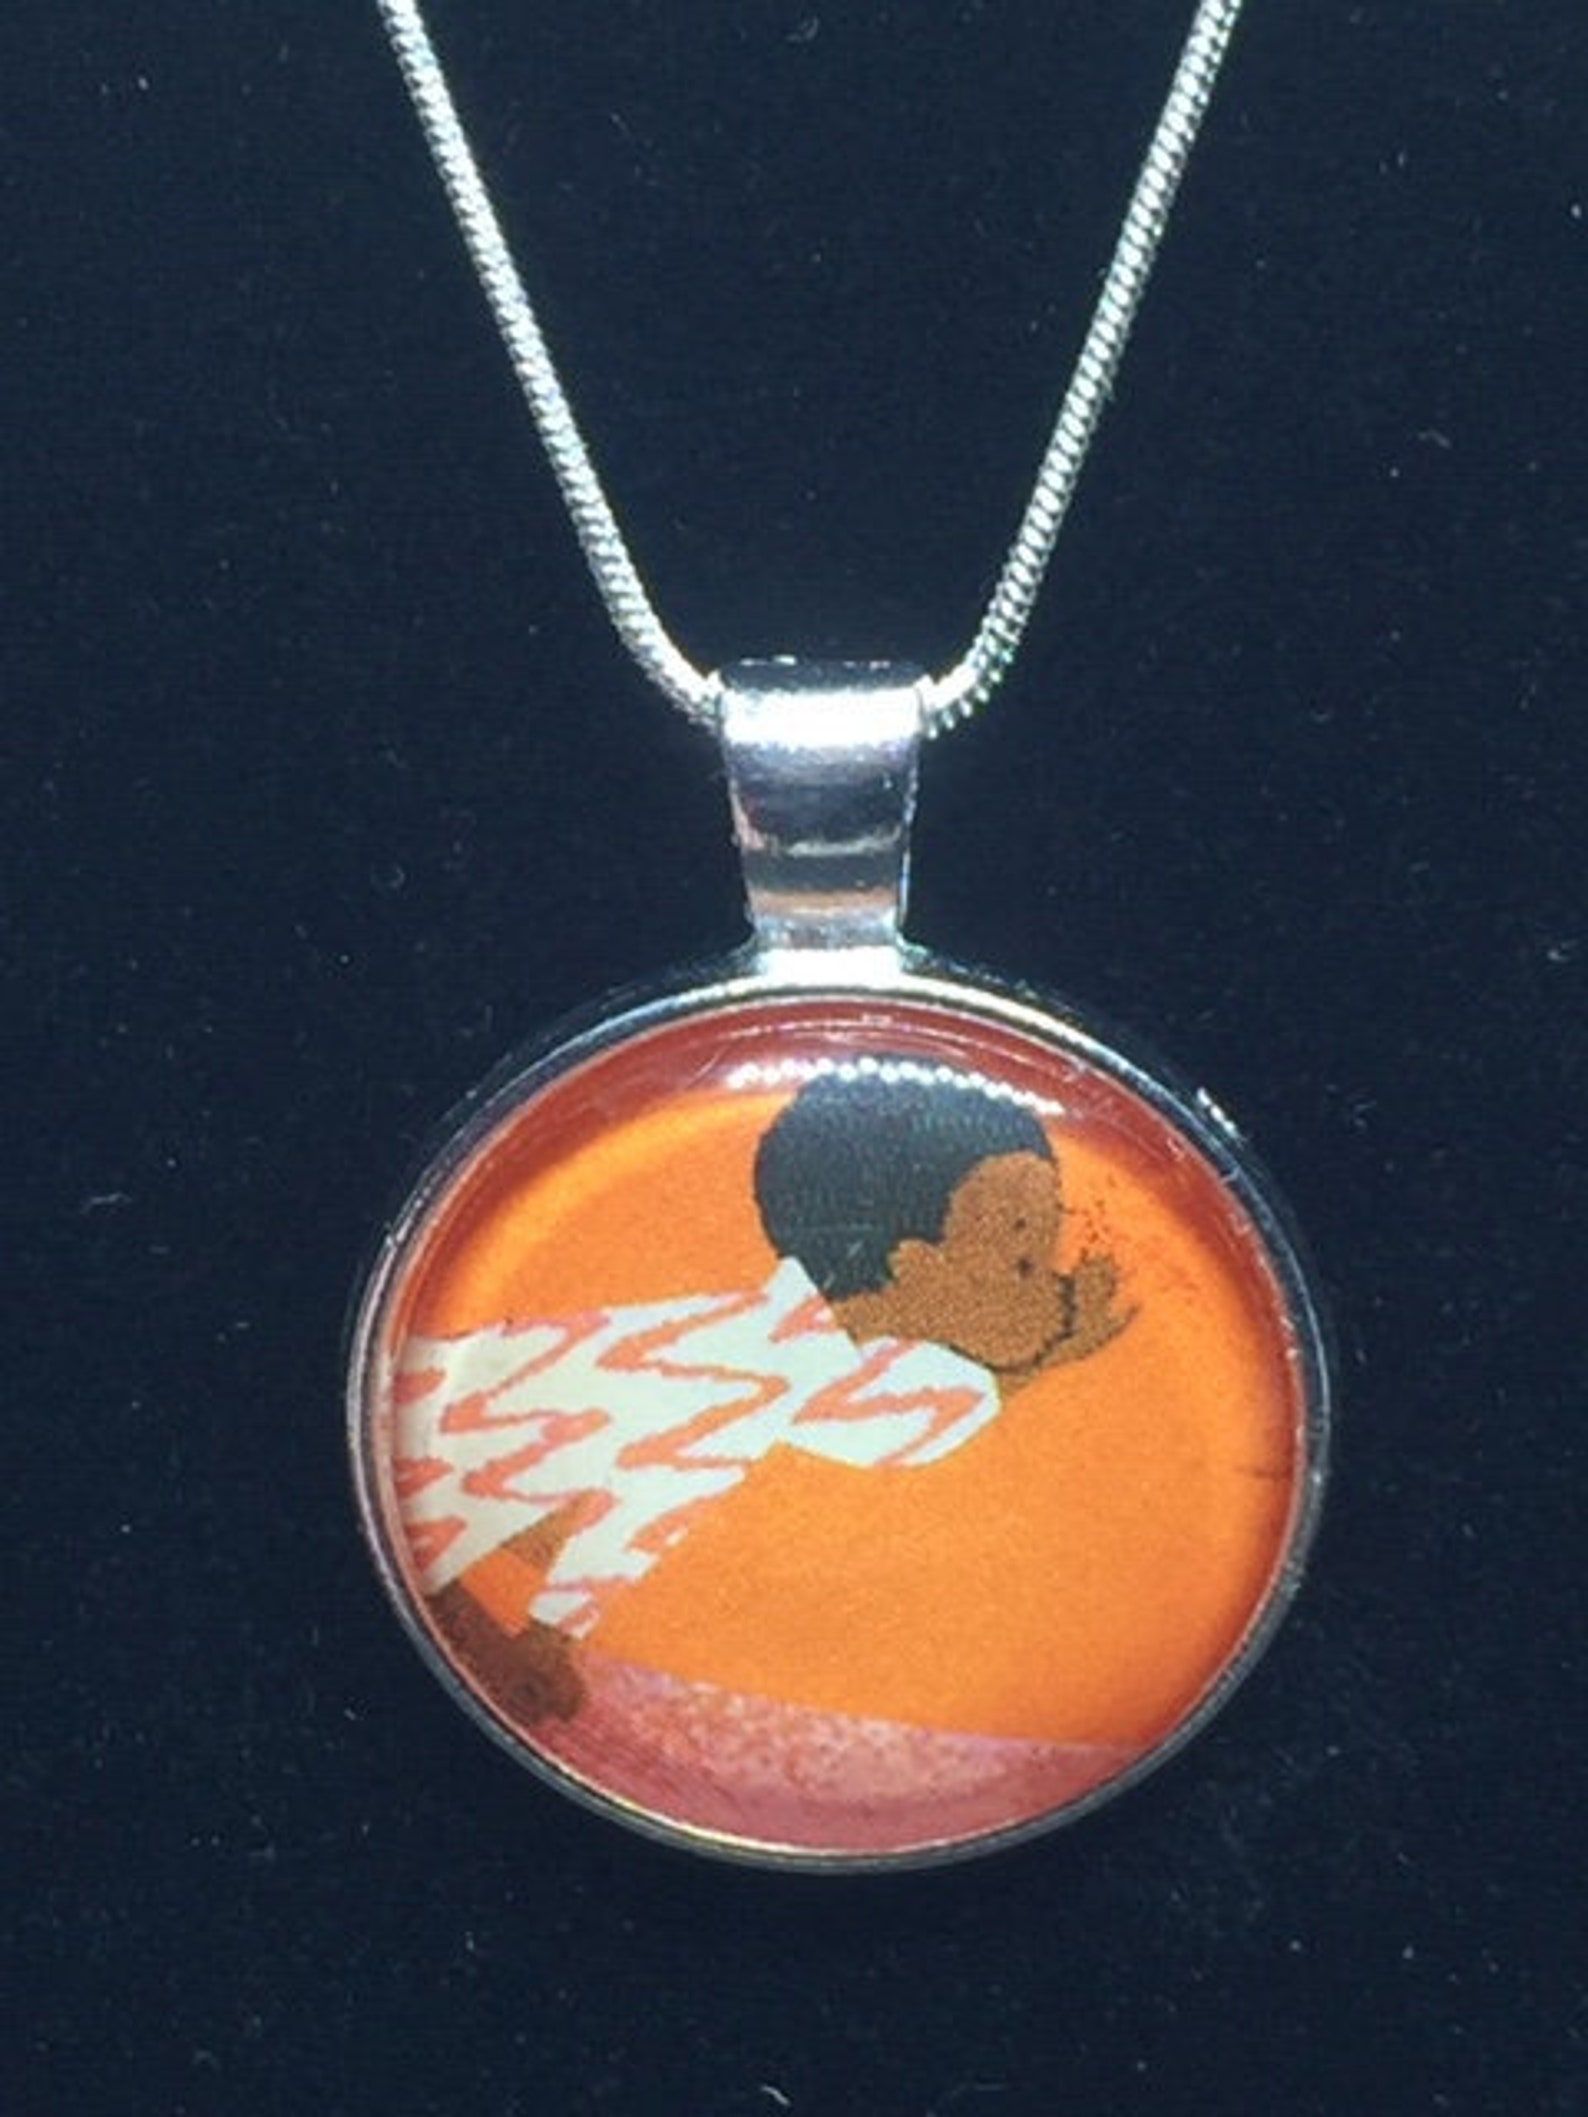 An orange image background with a Black boy from the book A Whistle for Willie made into a necklace pendant. It is on a black background. 